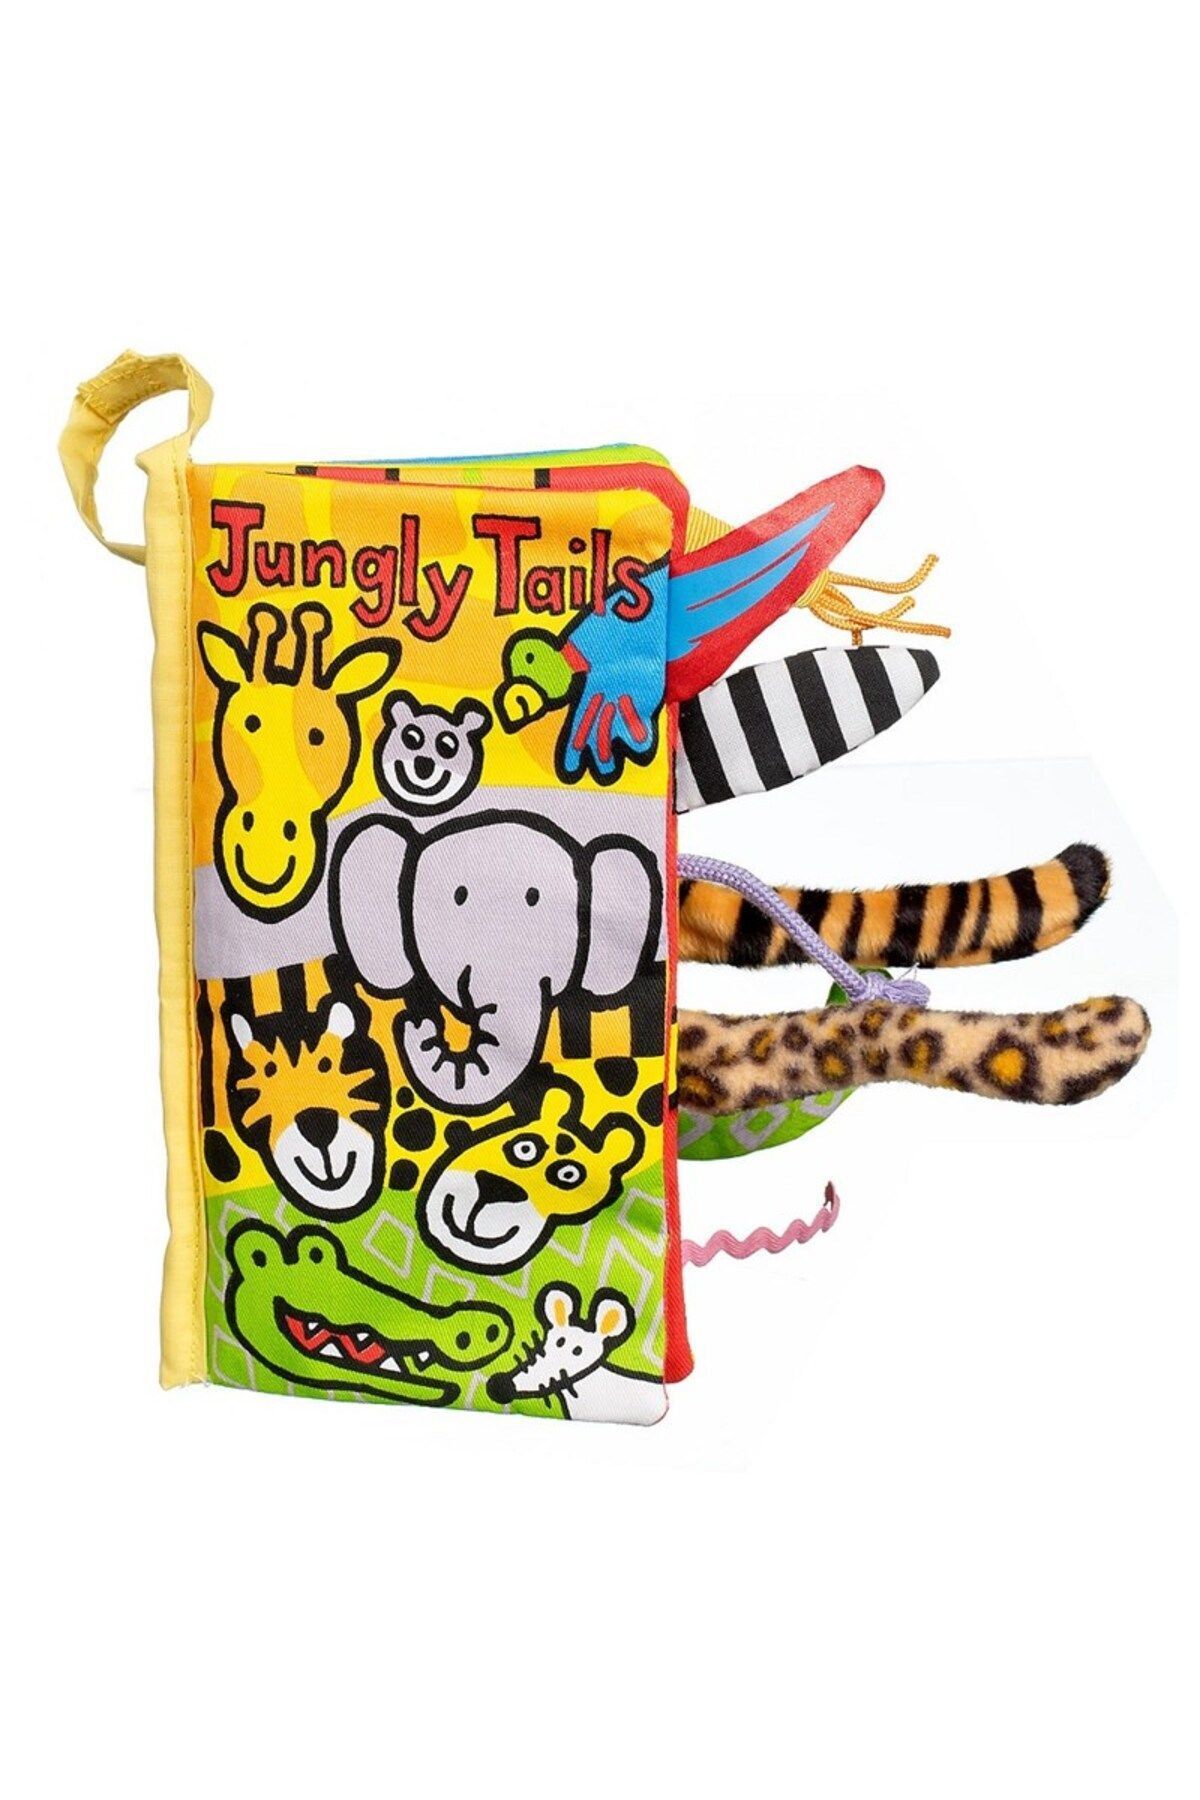 Jellycat Bez Kitap/jungly Tails Book